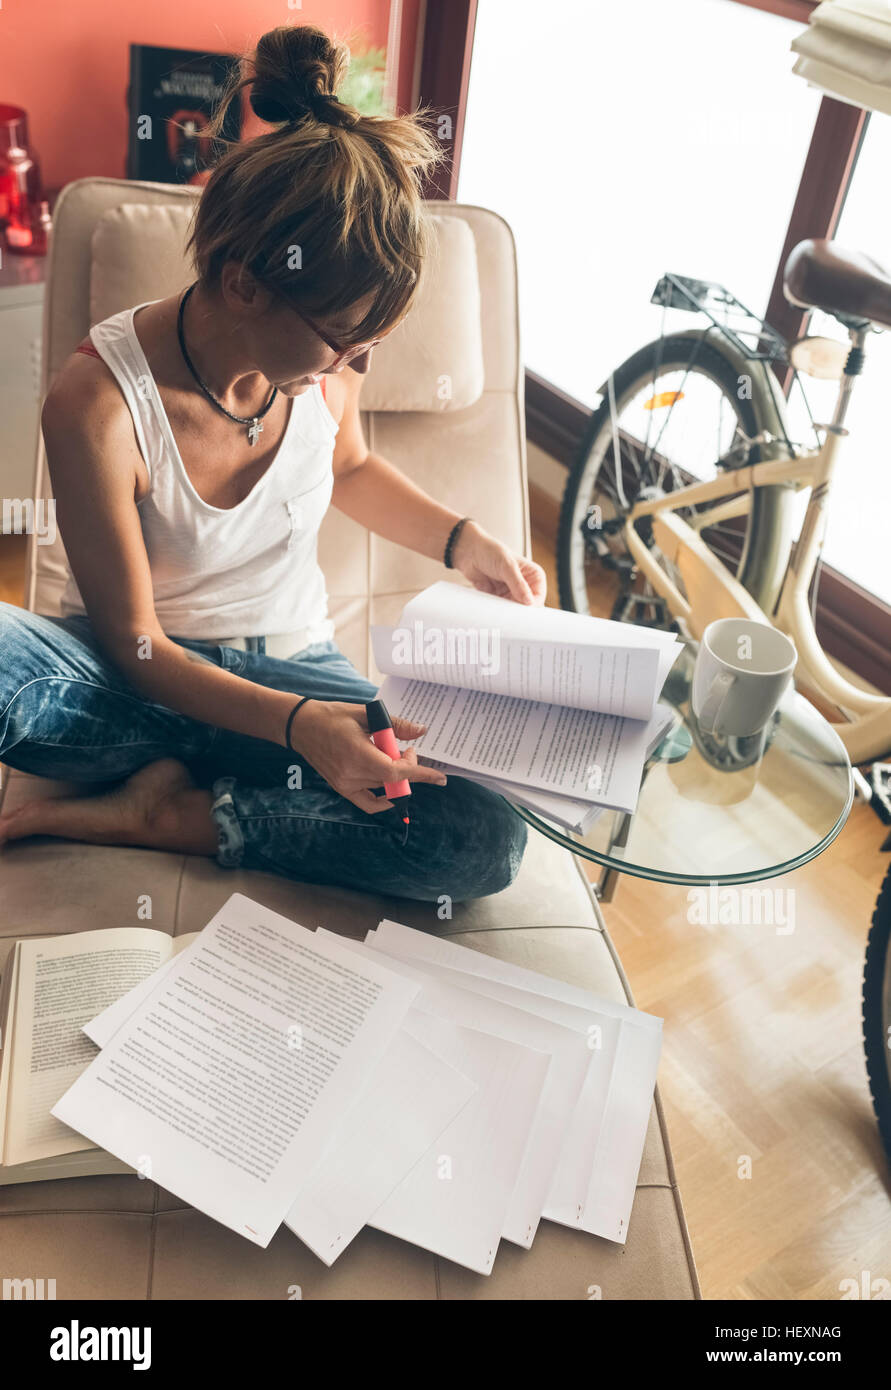 Woman at home working on script Stock Photo